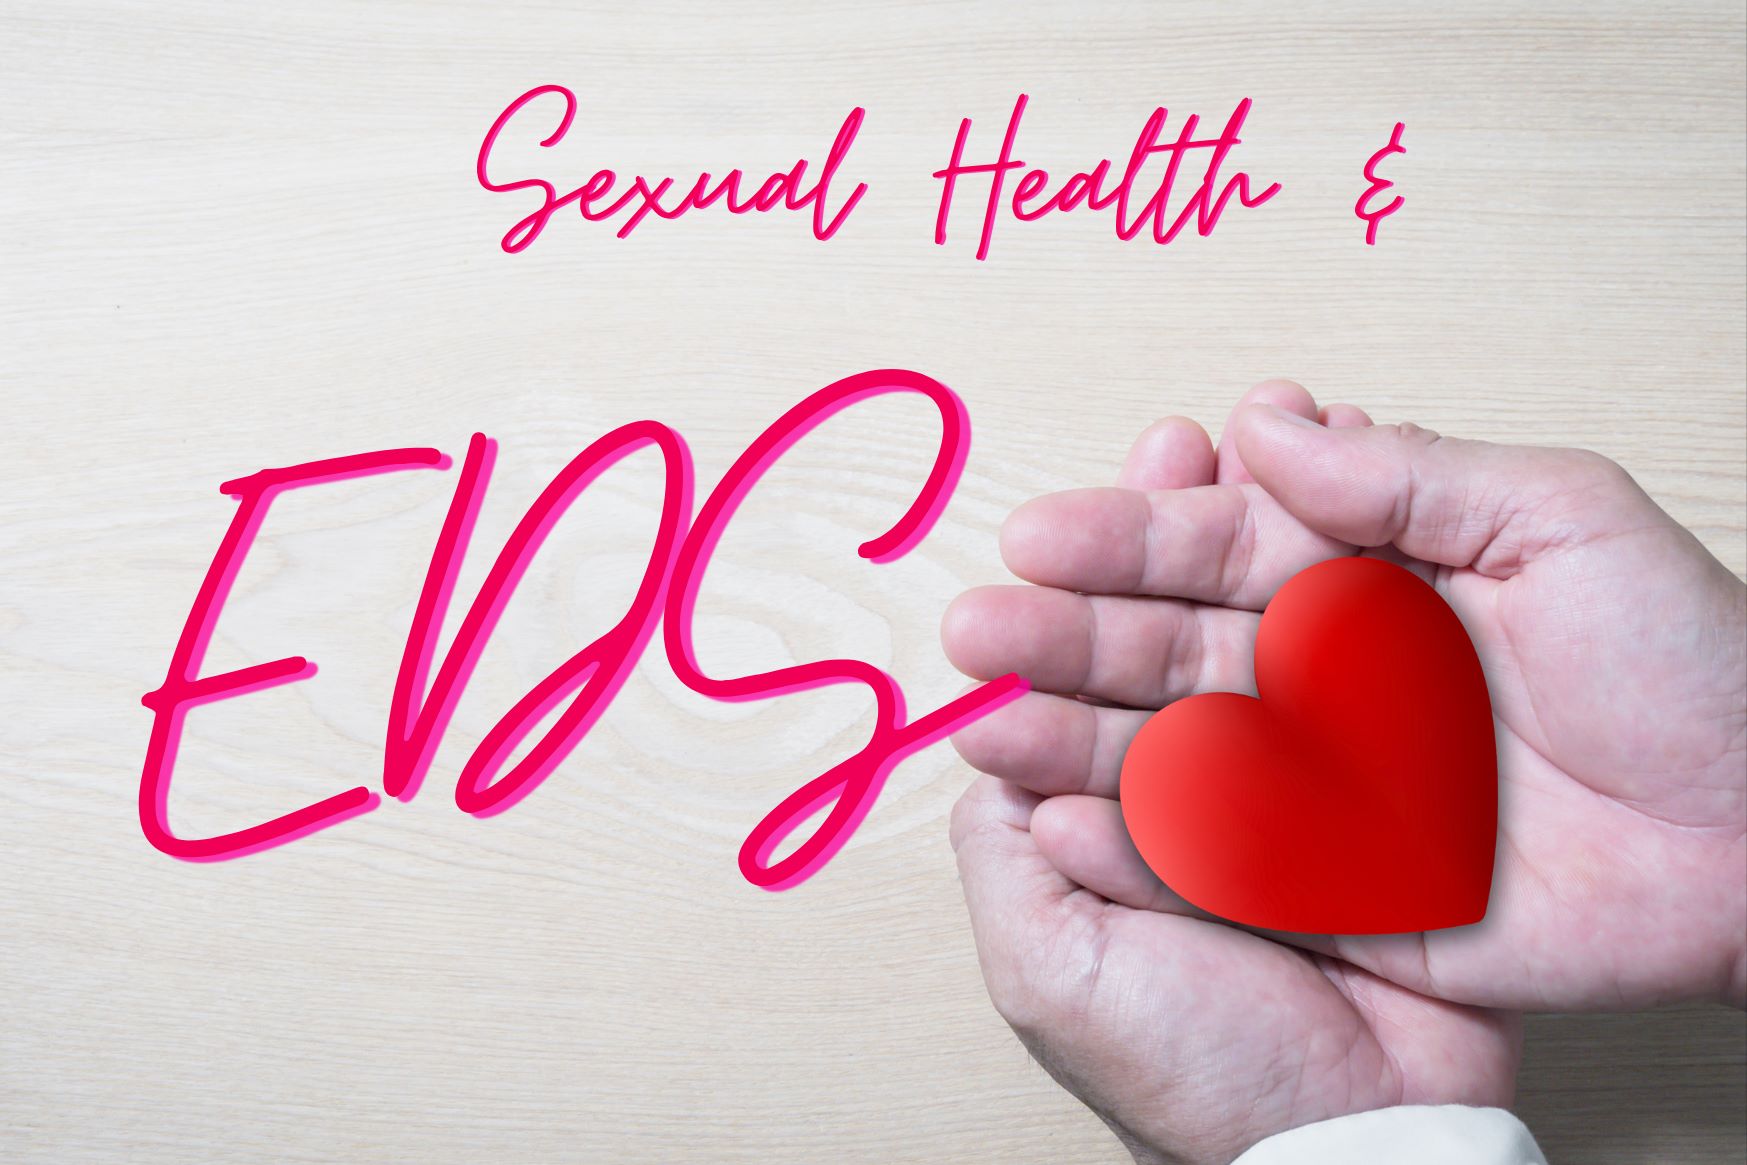 Ehlers-Danlos Syndromes, gynecological complications and sexual health